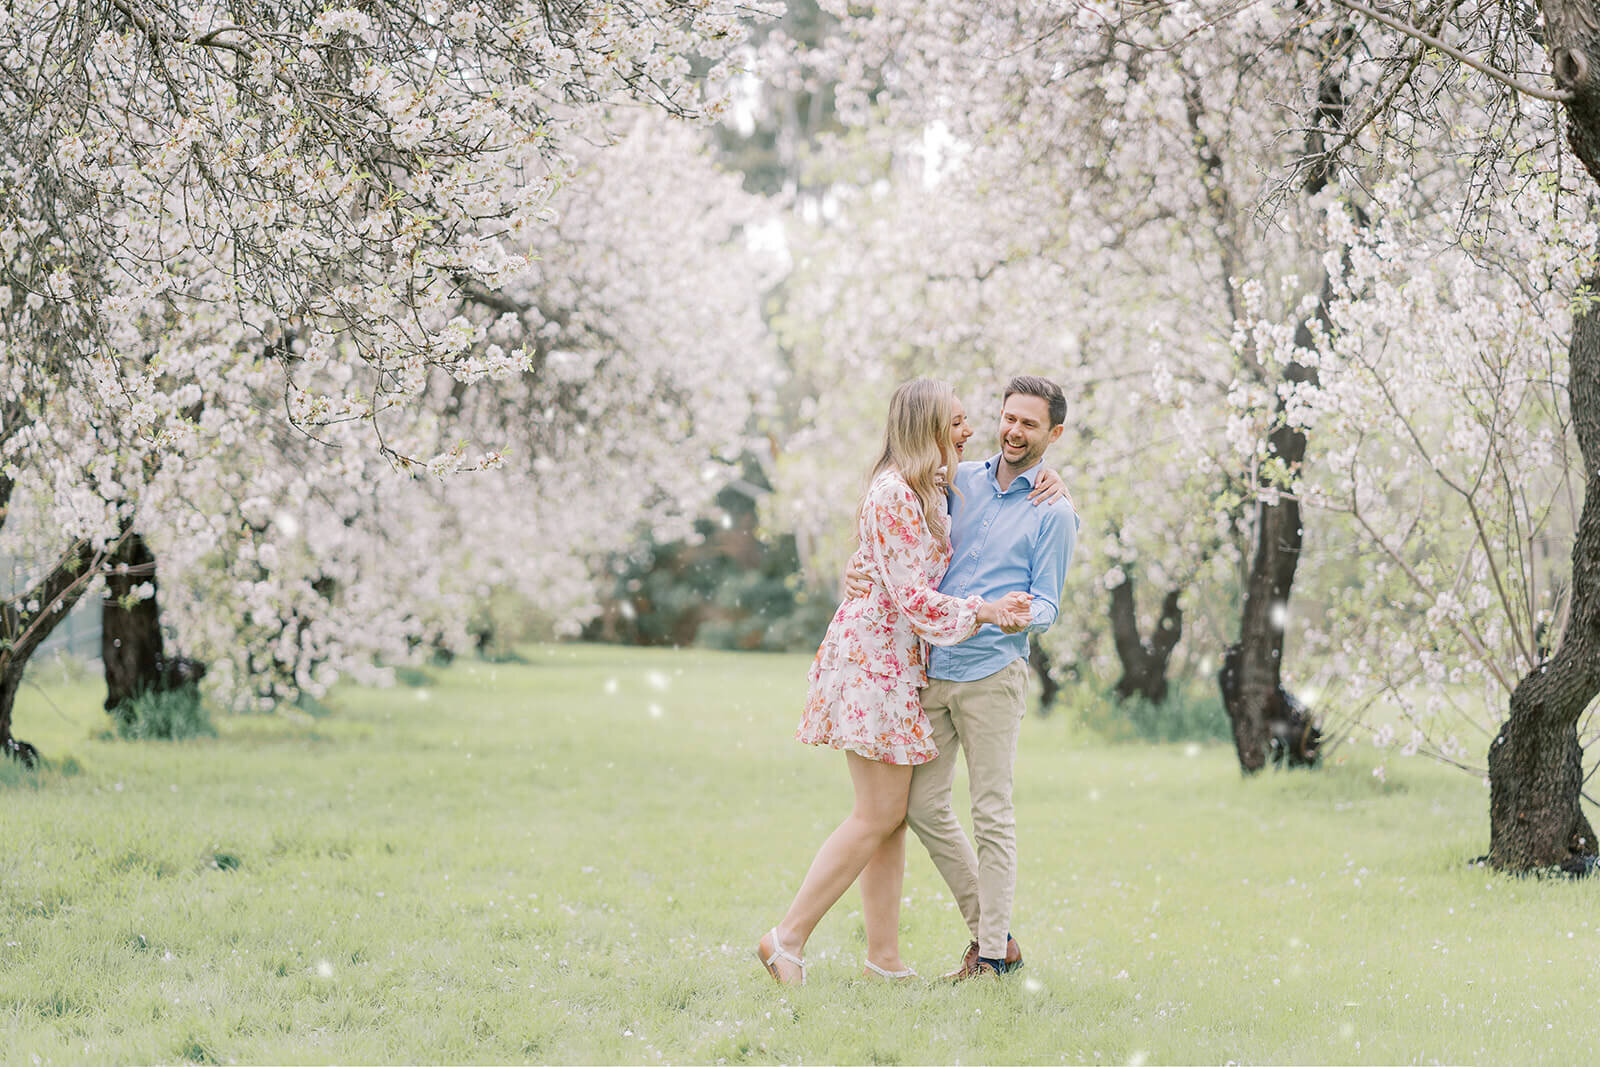 Couple dancing in Adelaide's scenic backdrop with our professional almond blossom photoshoot.